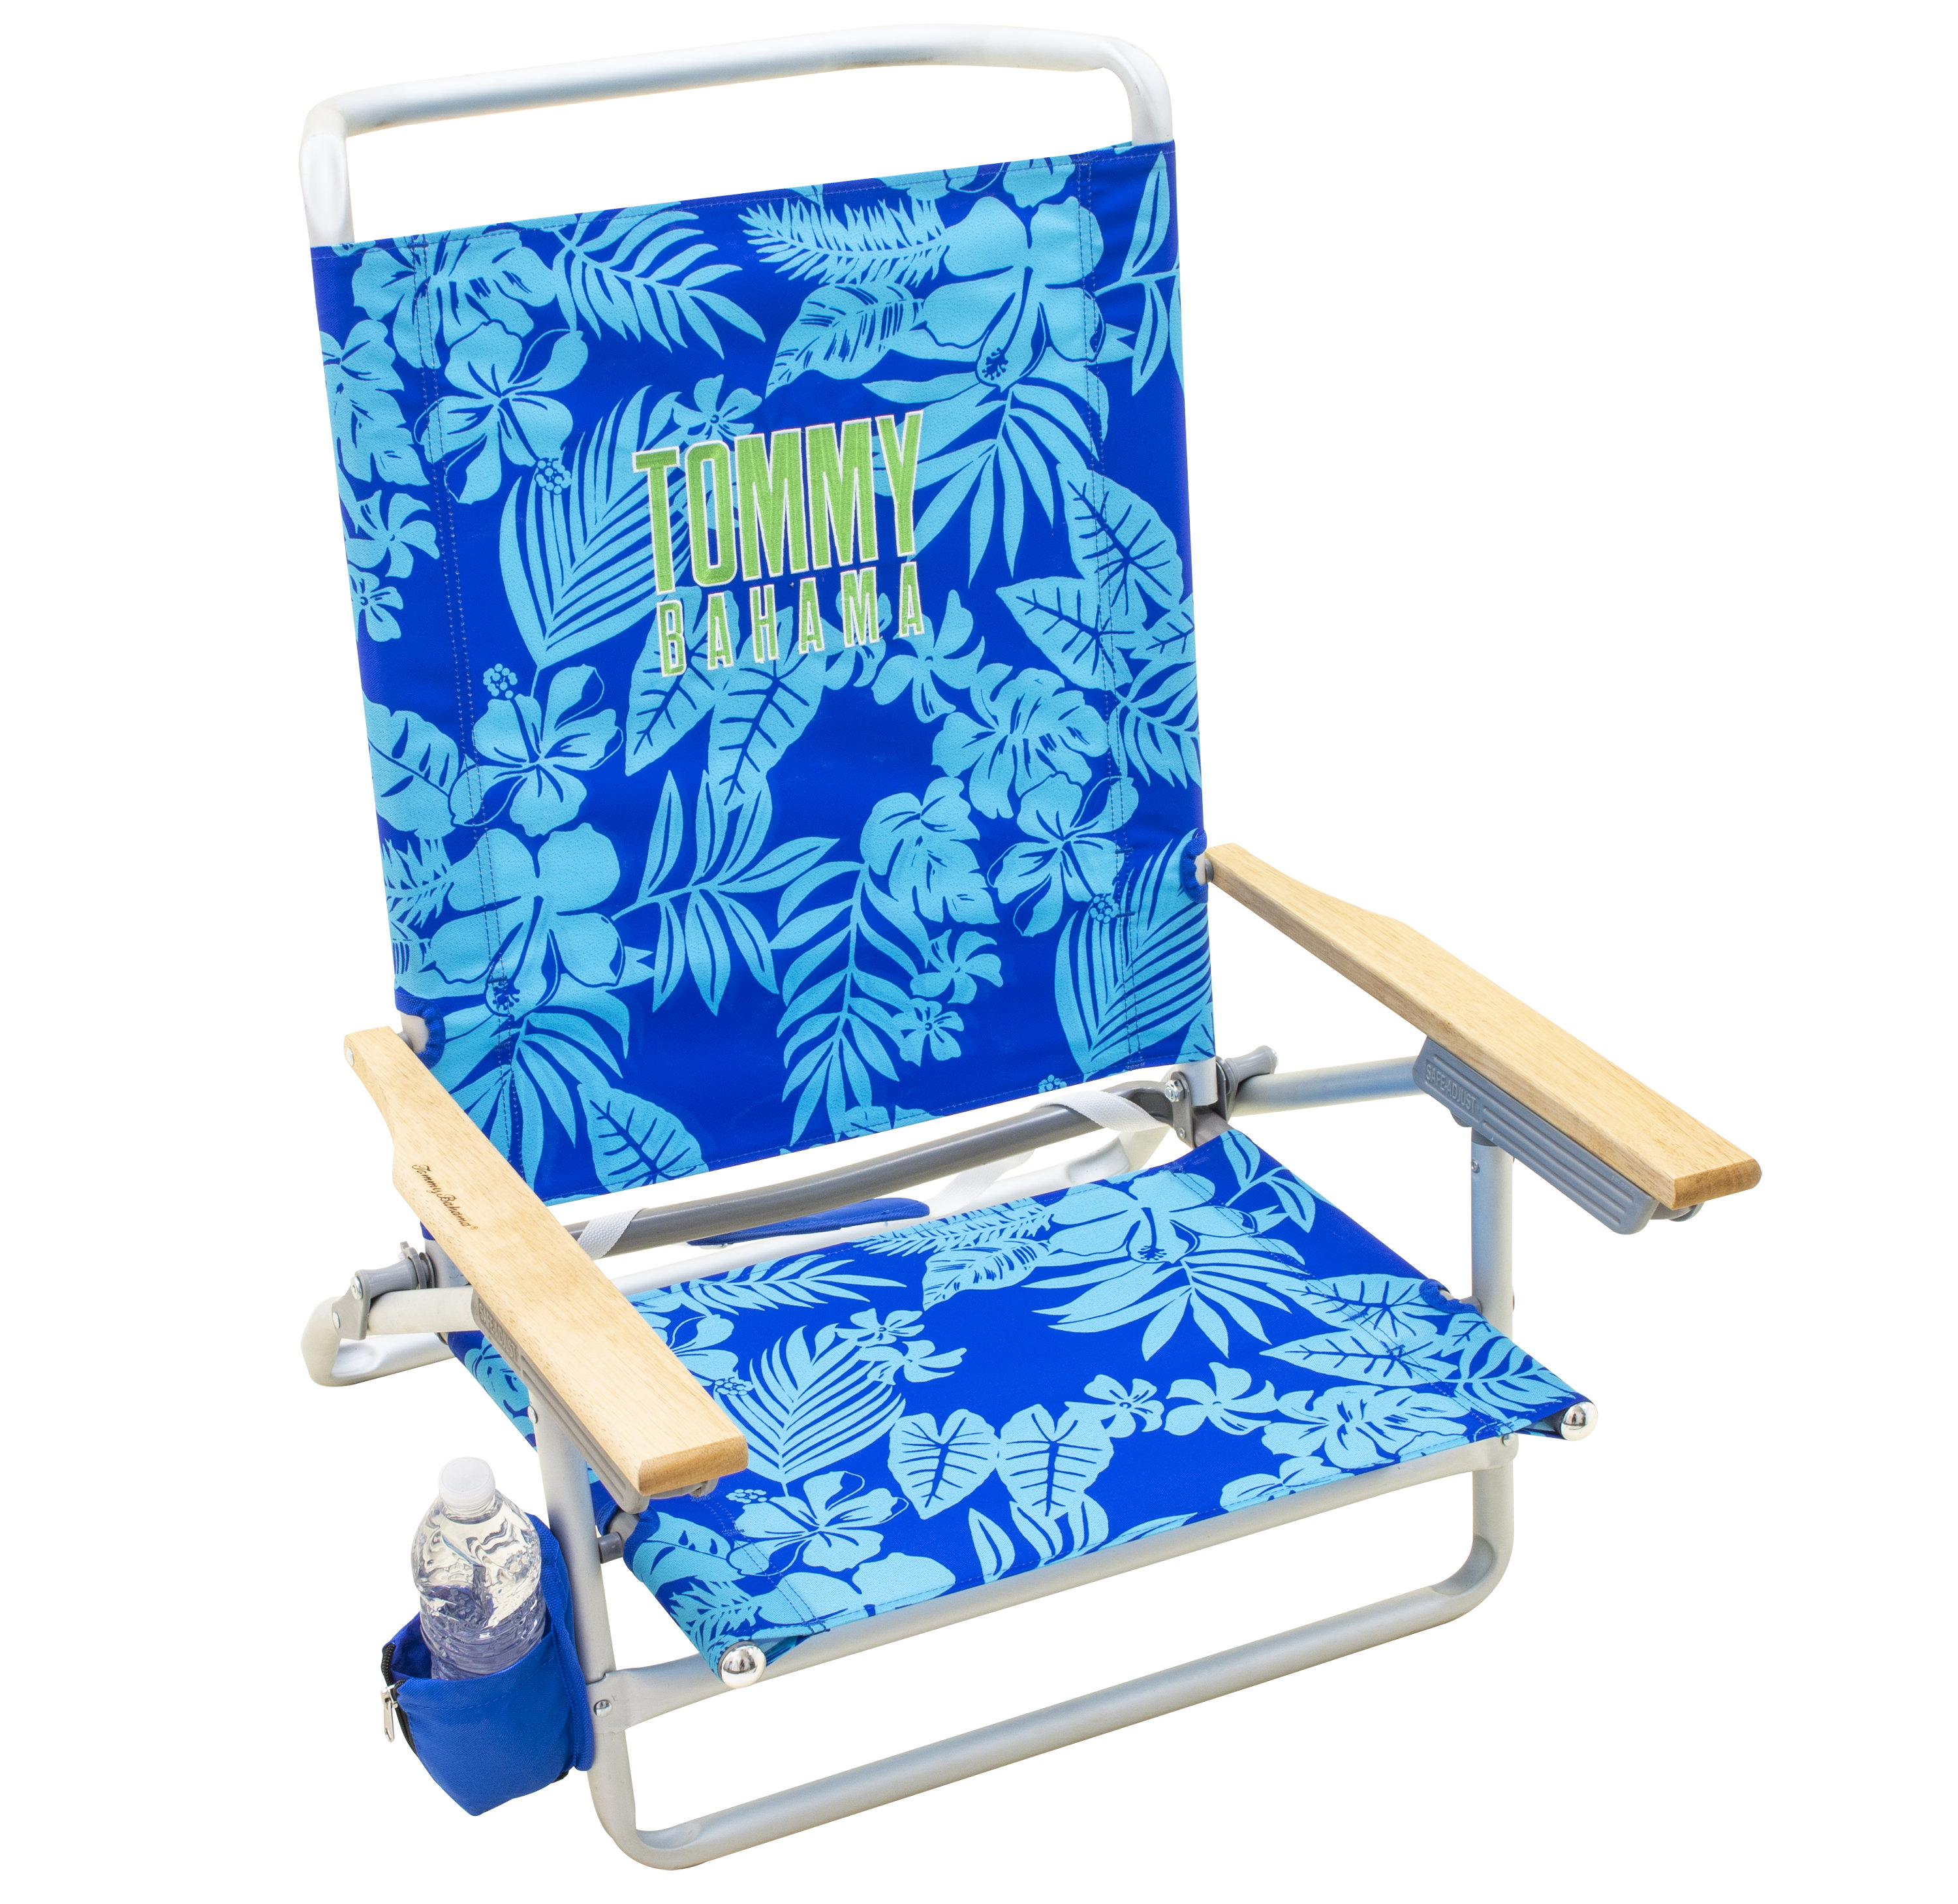 Tommy Bahama Beach Chair Adjusts to 5 Positions and Lays Flat 